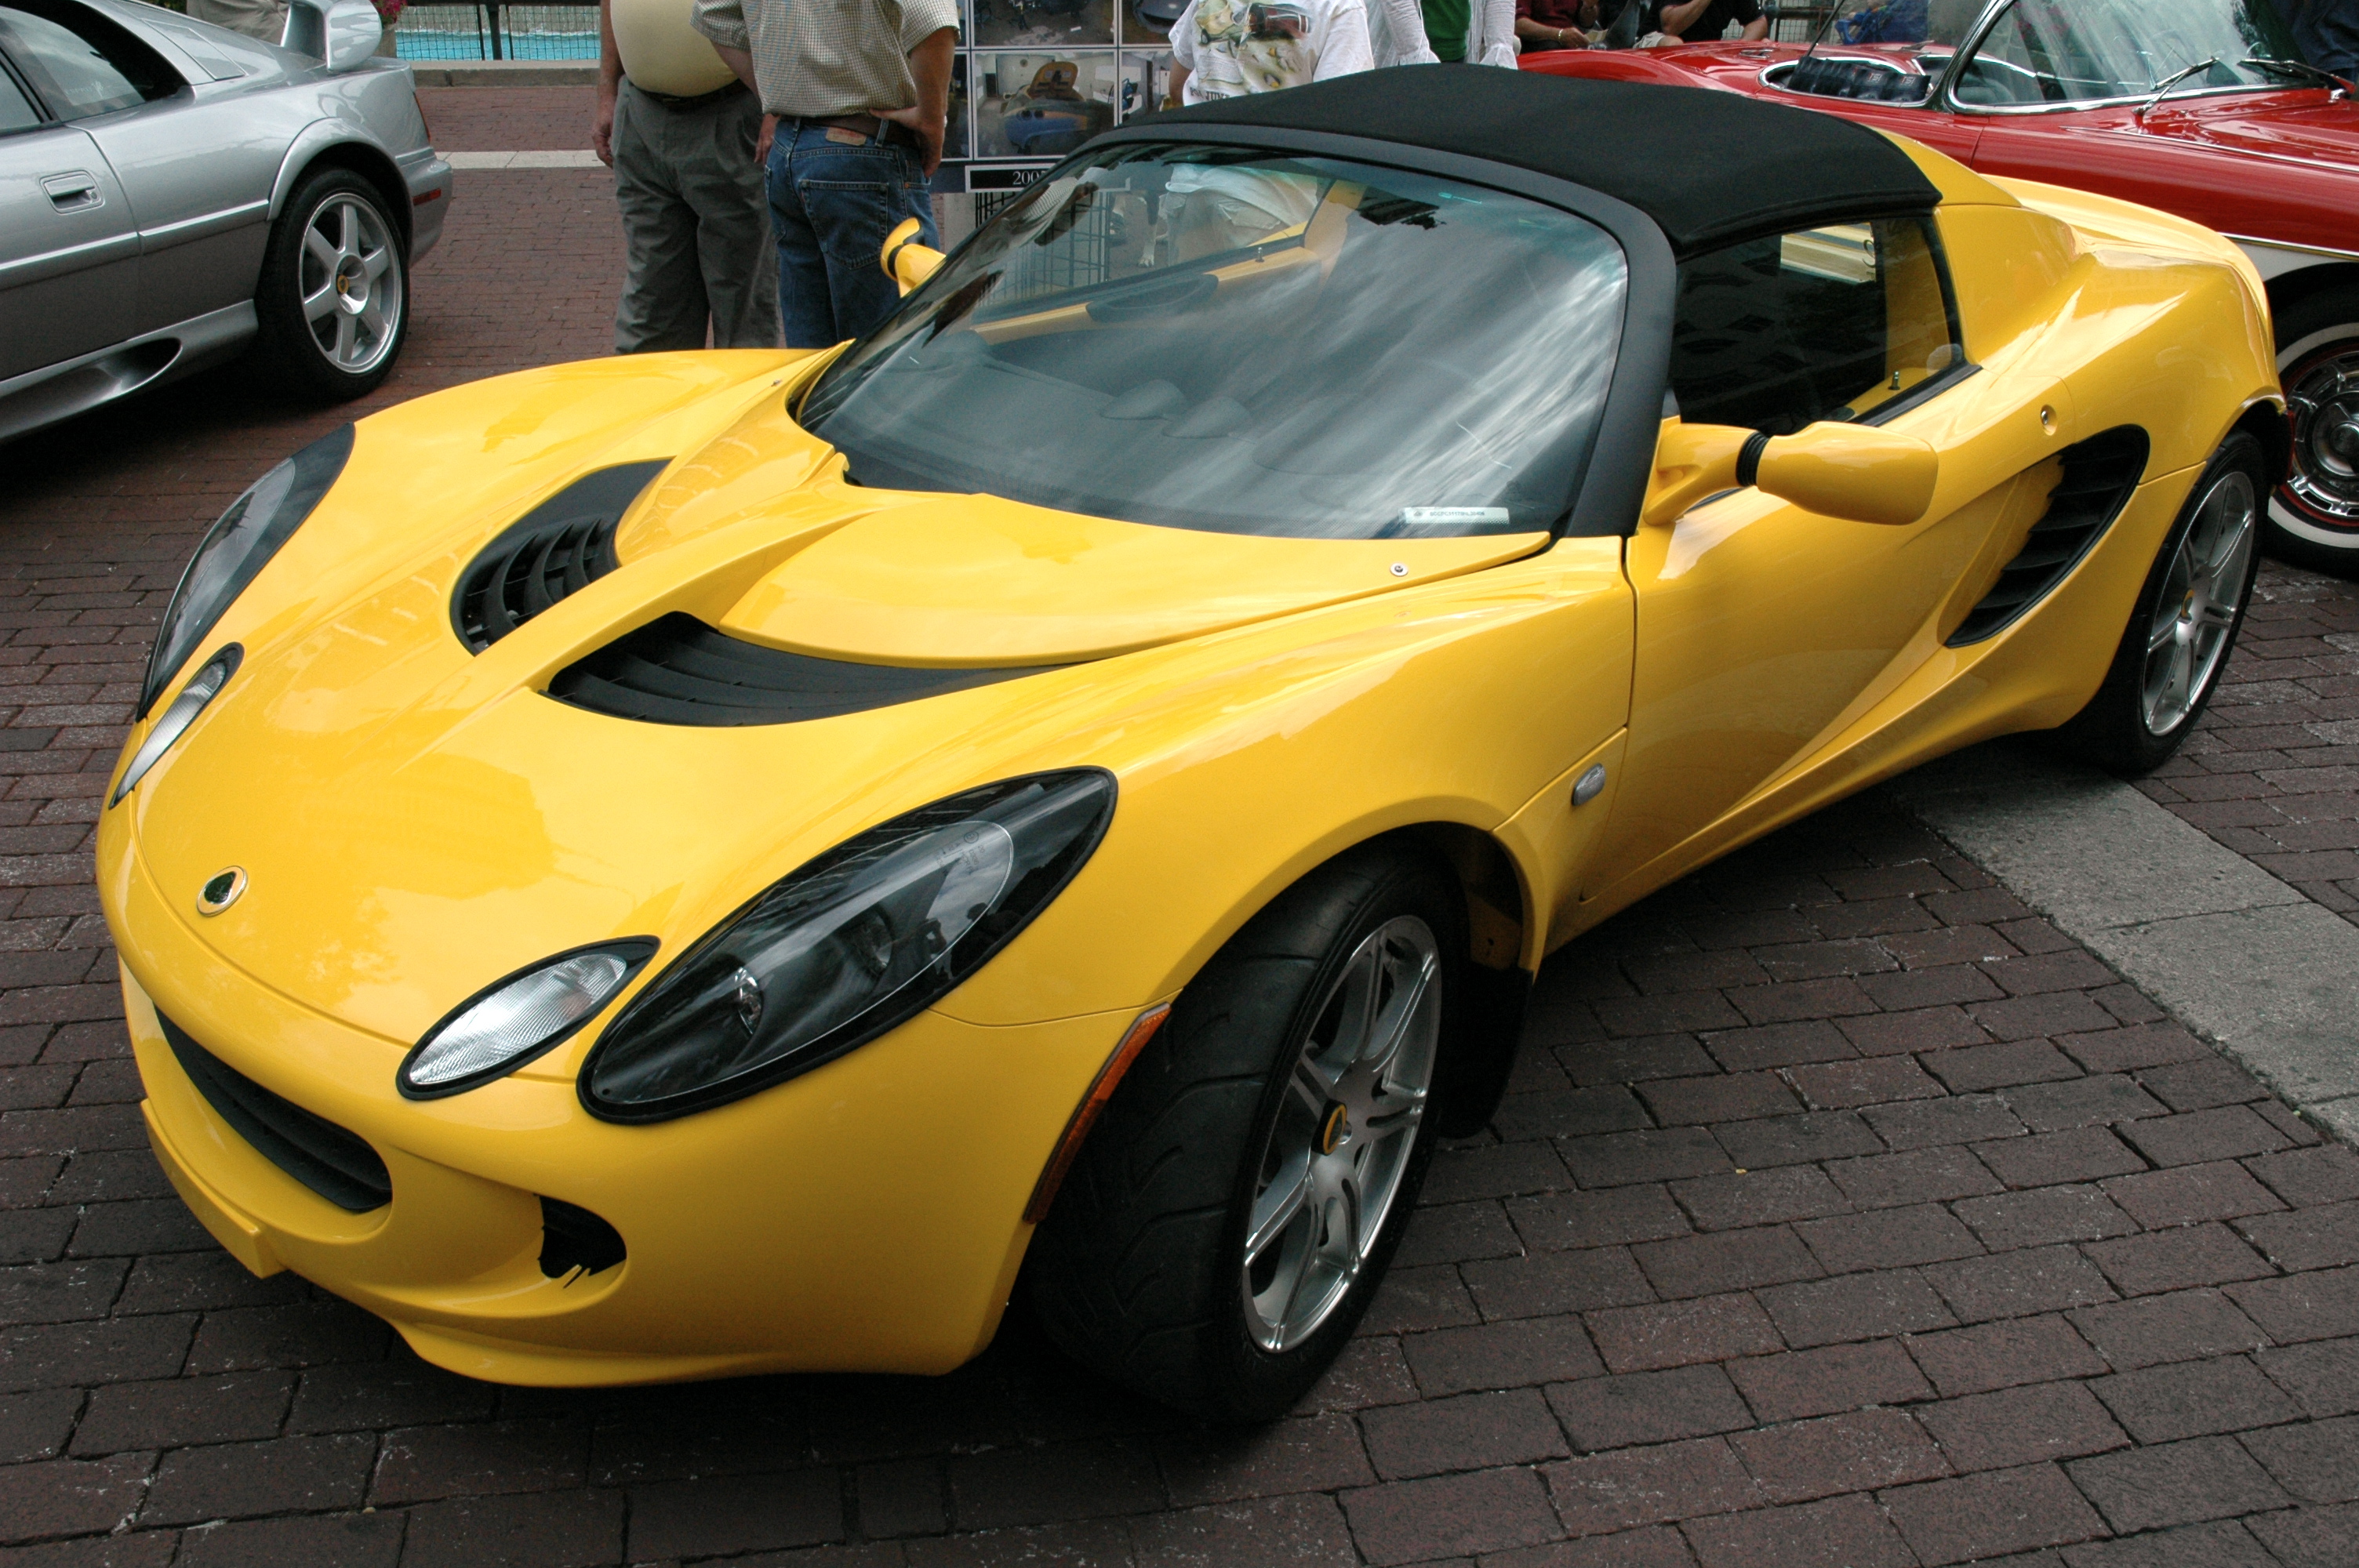 Dossier : Lotus Elise au Concours Indy.jpg - Wikimedia Commons